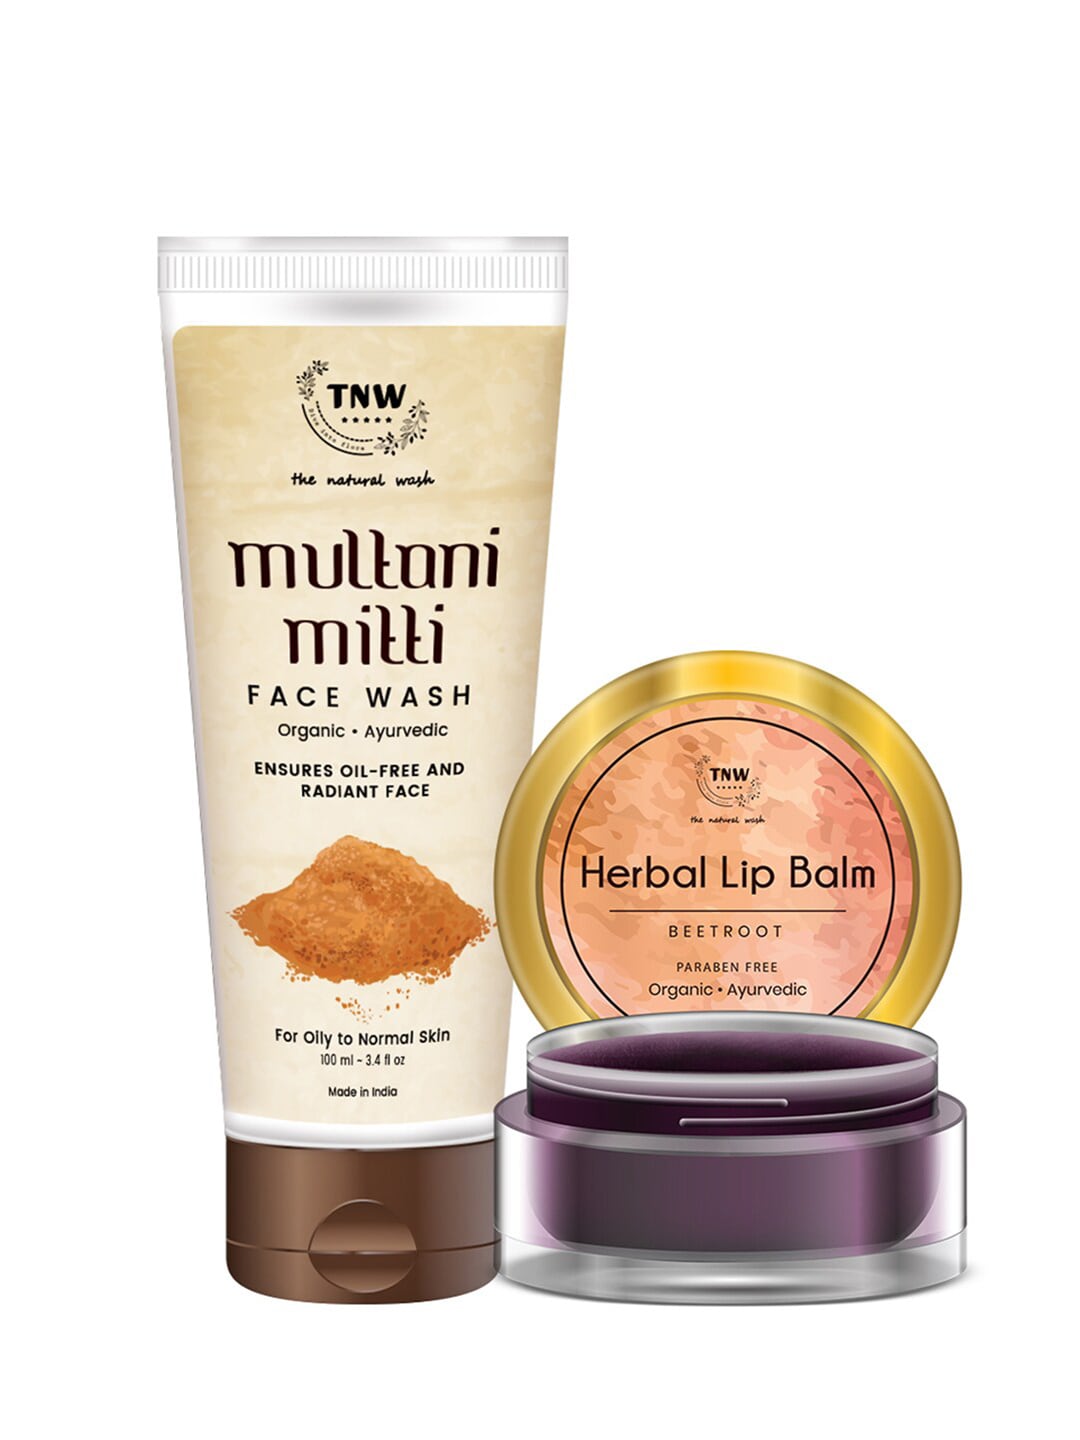 TNW The Natural Wash Combo of 2 Lip Balm 5 Gm and Multani Mitti Face Wash 100 ml Price in India